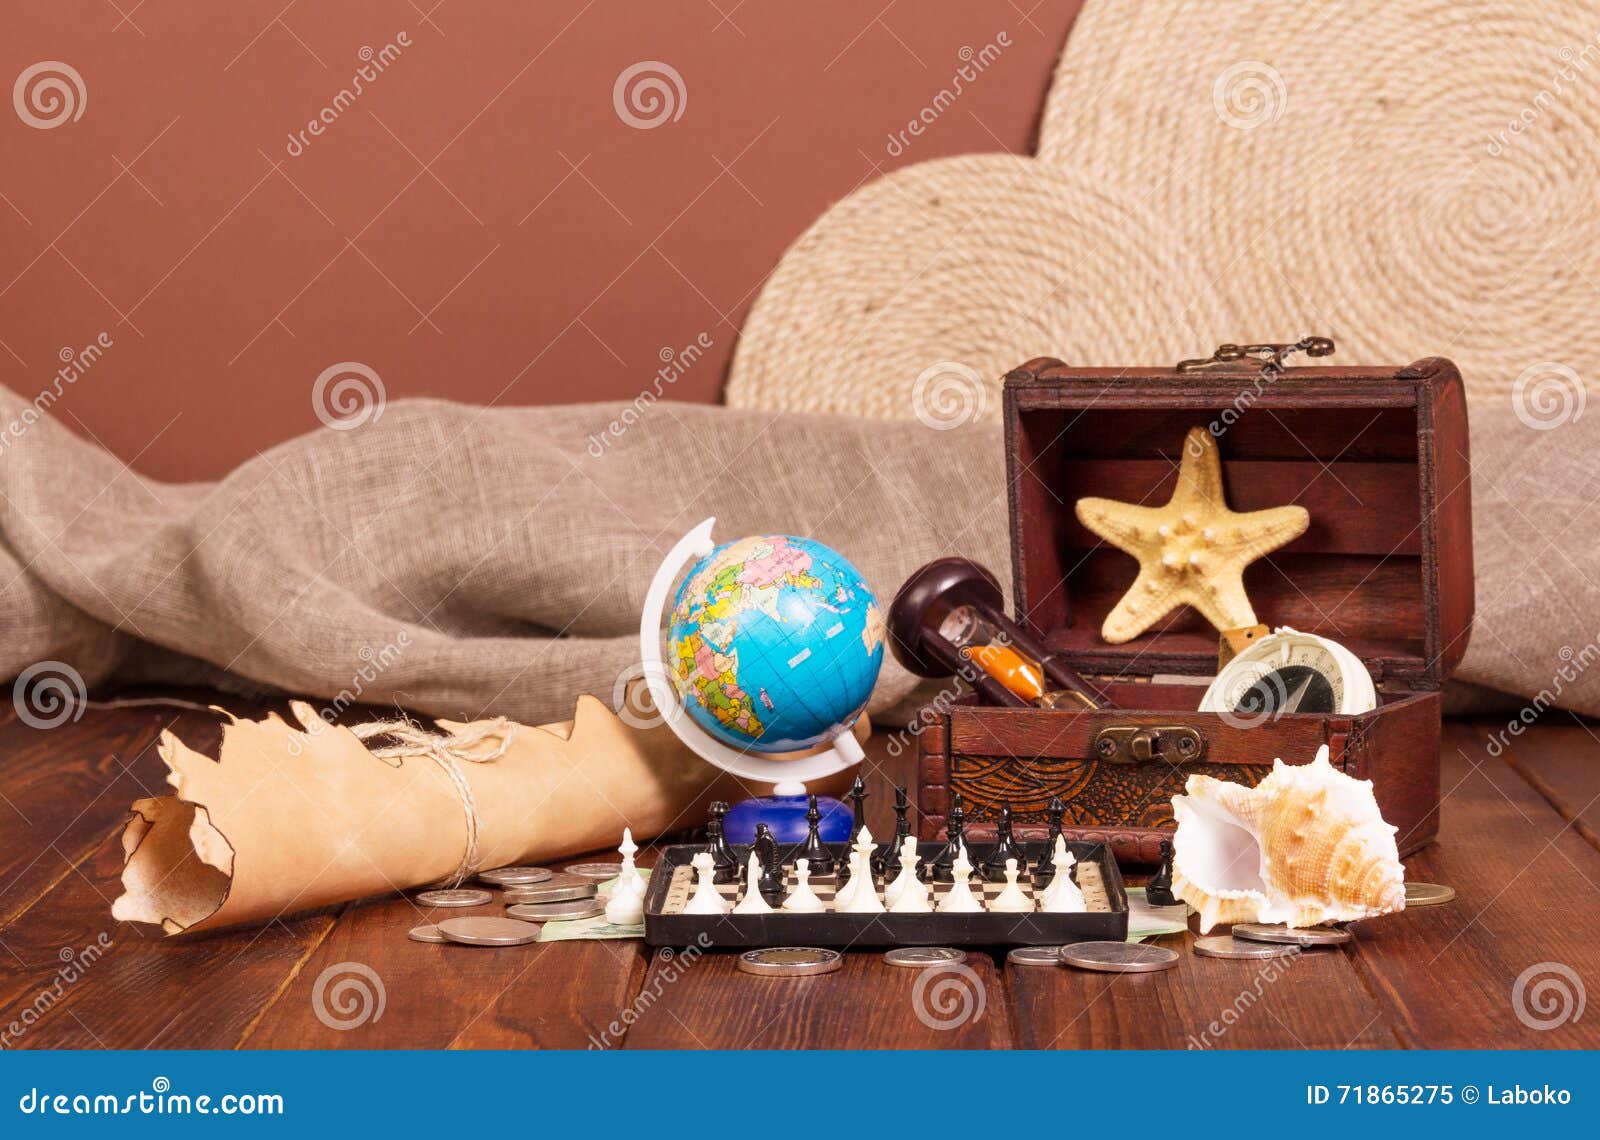 Chess Compass Stock Photos and Images - 123RF